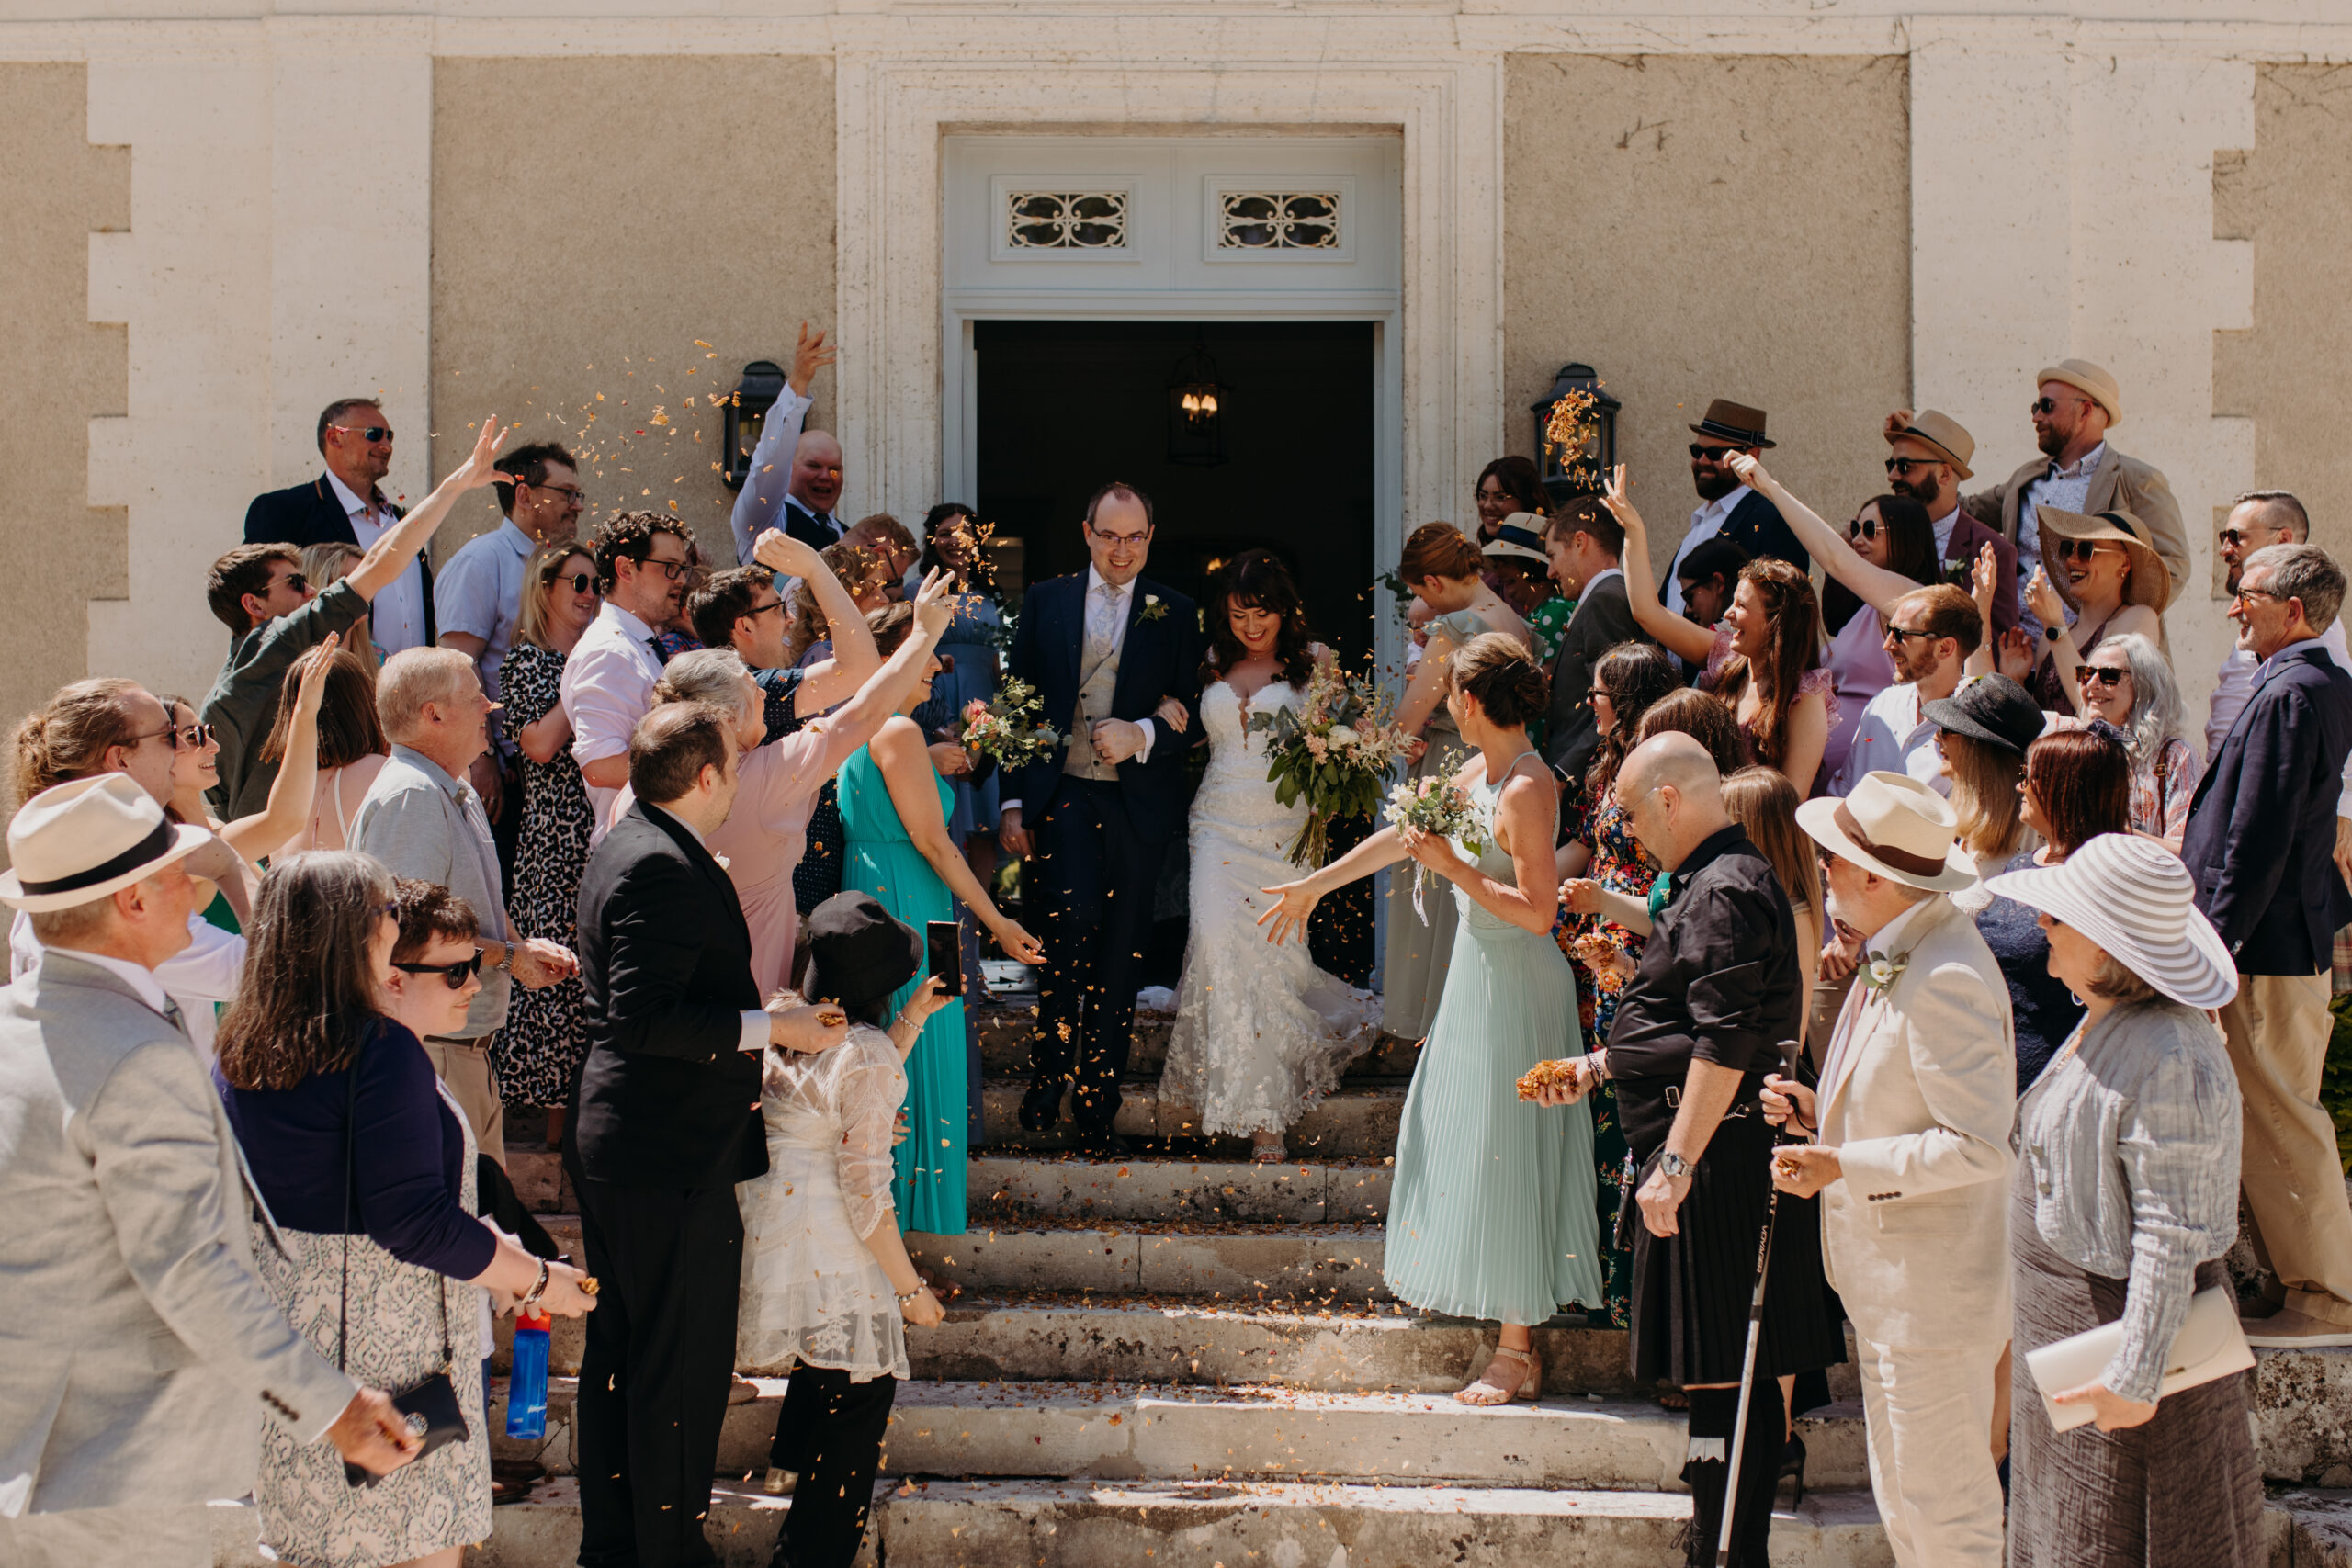 people gather on steps of chateau and throw rose petals towards bride and groom